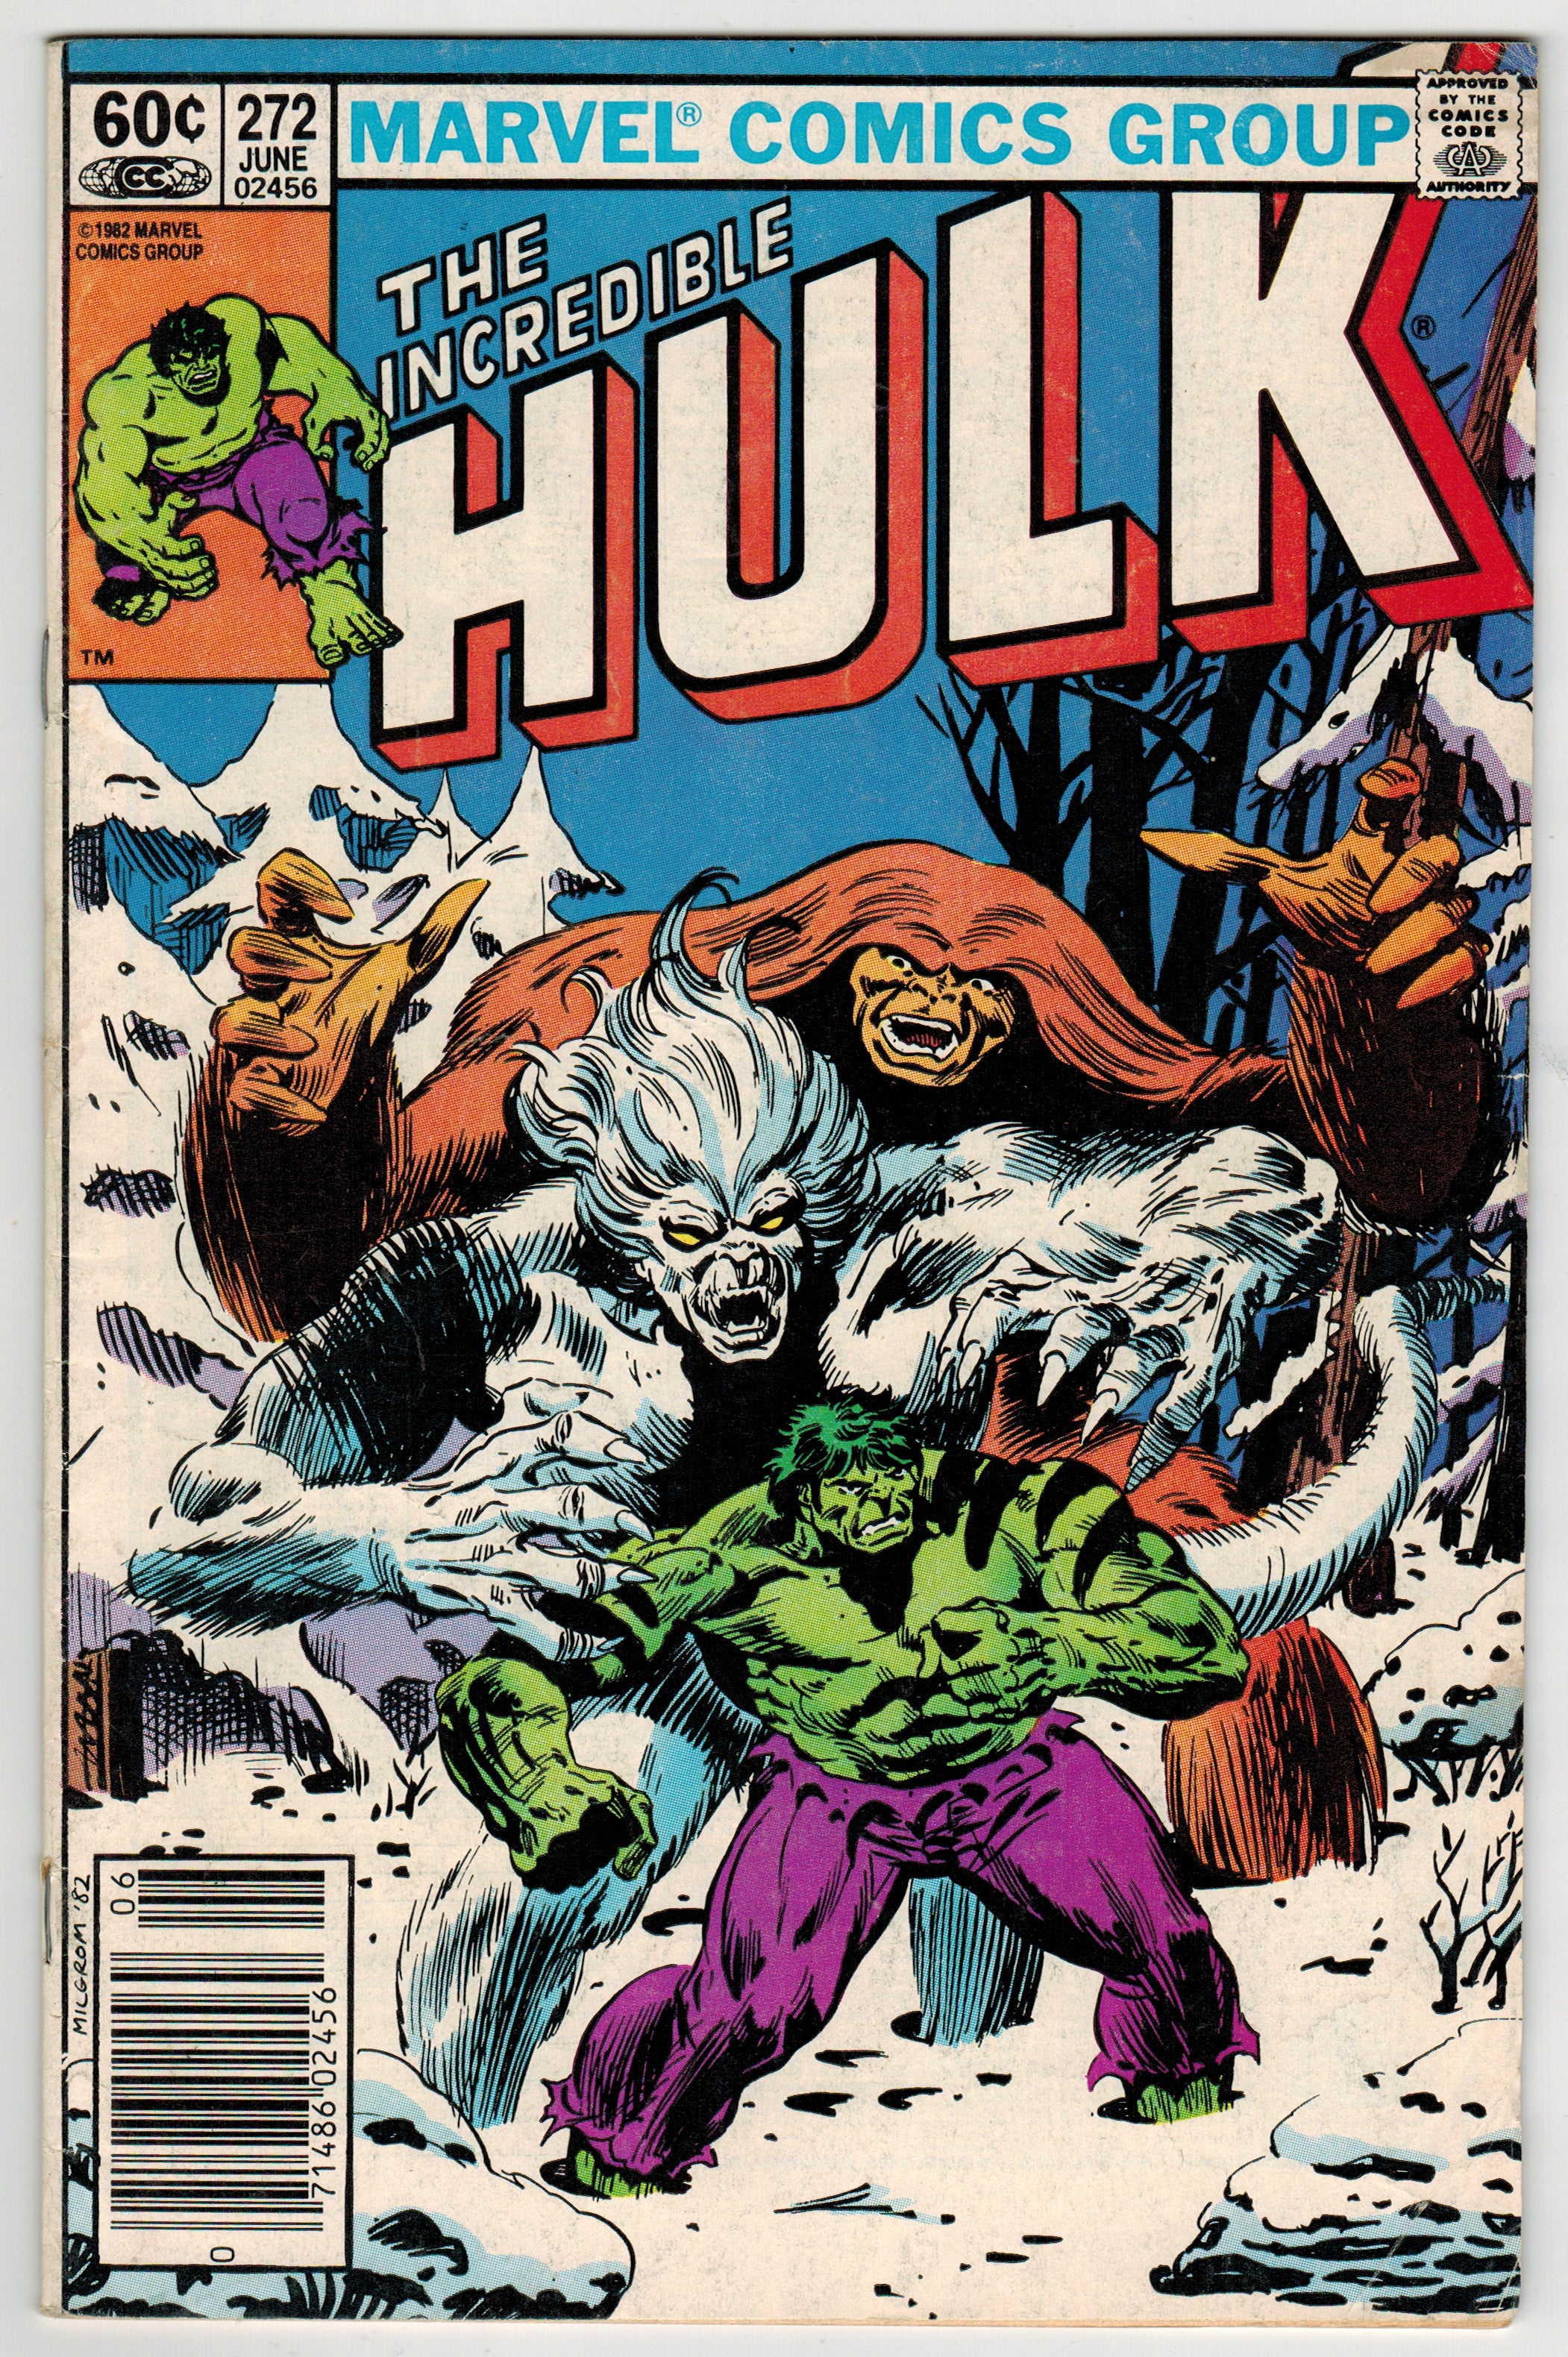 Photo of Incredible Hulk, Vol. 1 (1982) Issue 272 - Very Good Comic sold by Stronghold Collectibles